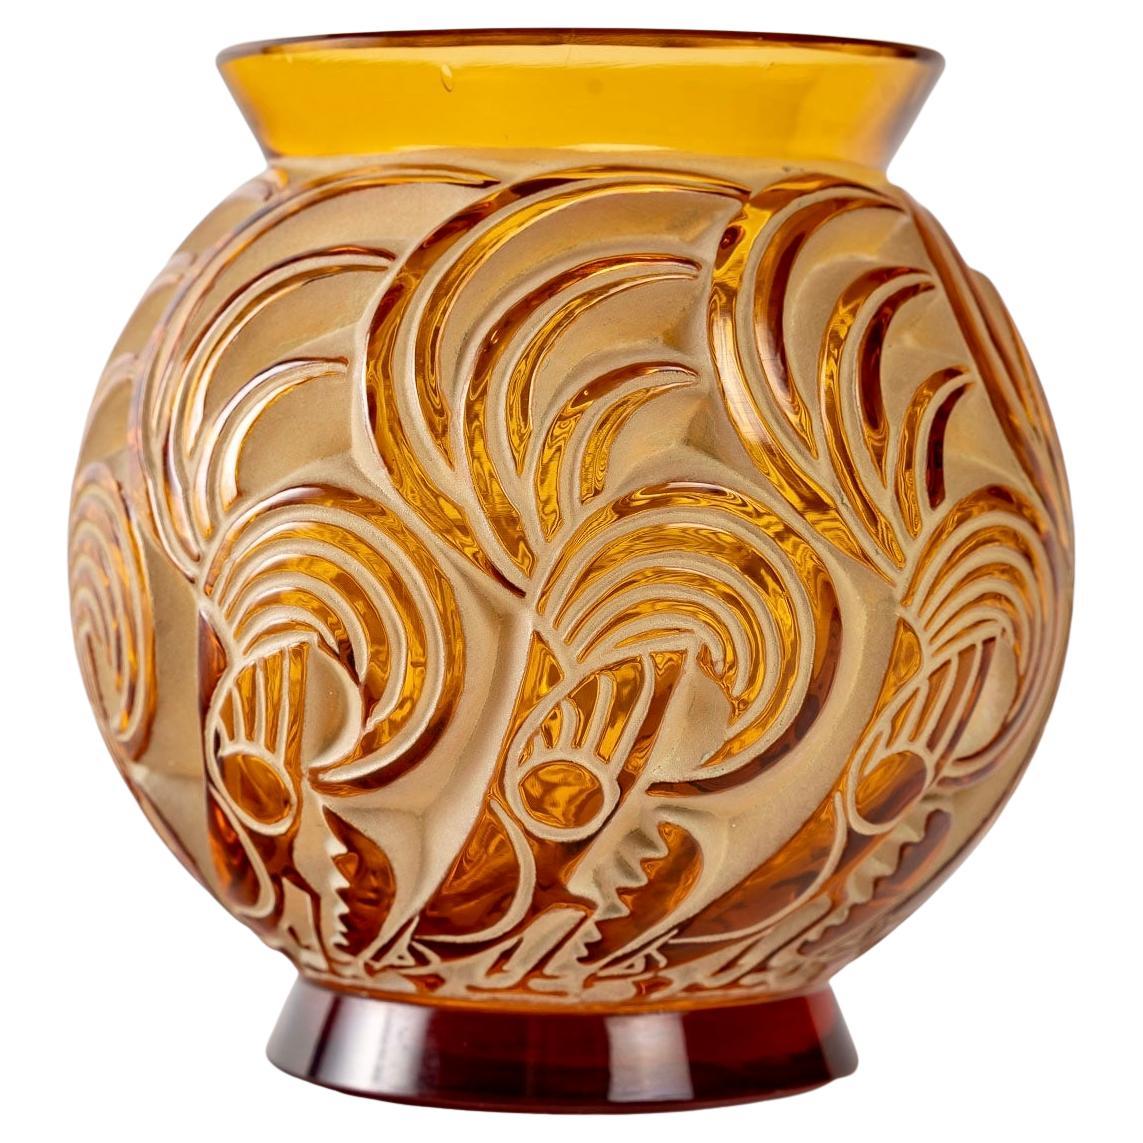 1931 René Lalique, Vase Bresse Amber Yellow Glass with Green Beige Patina